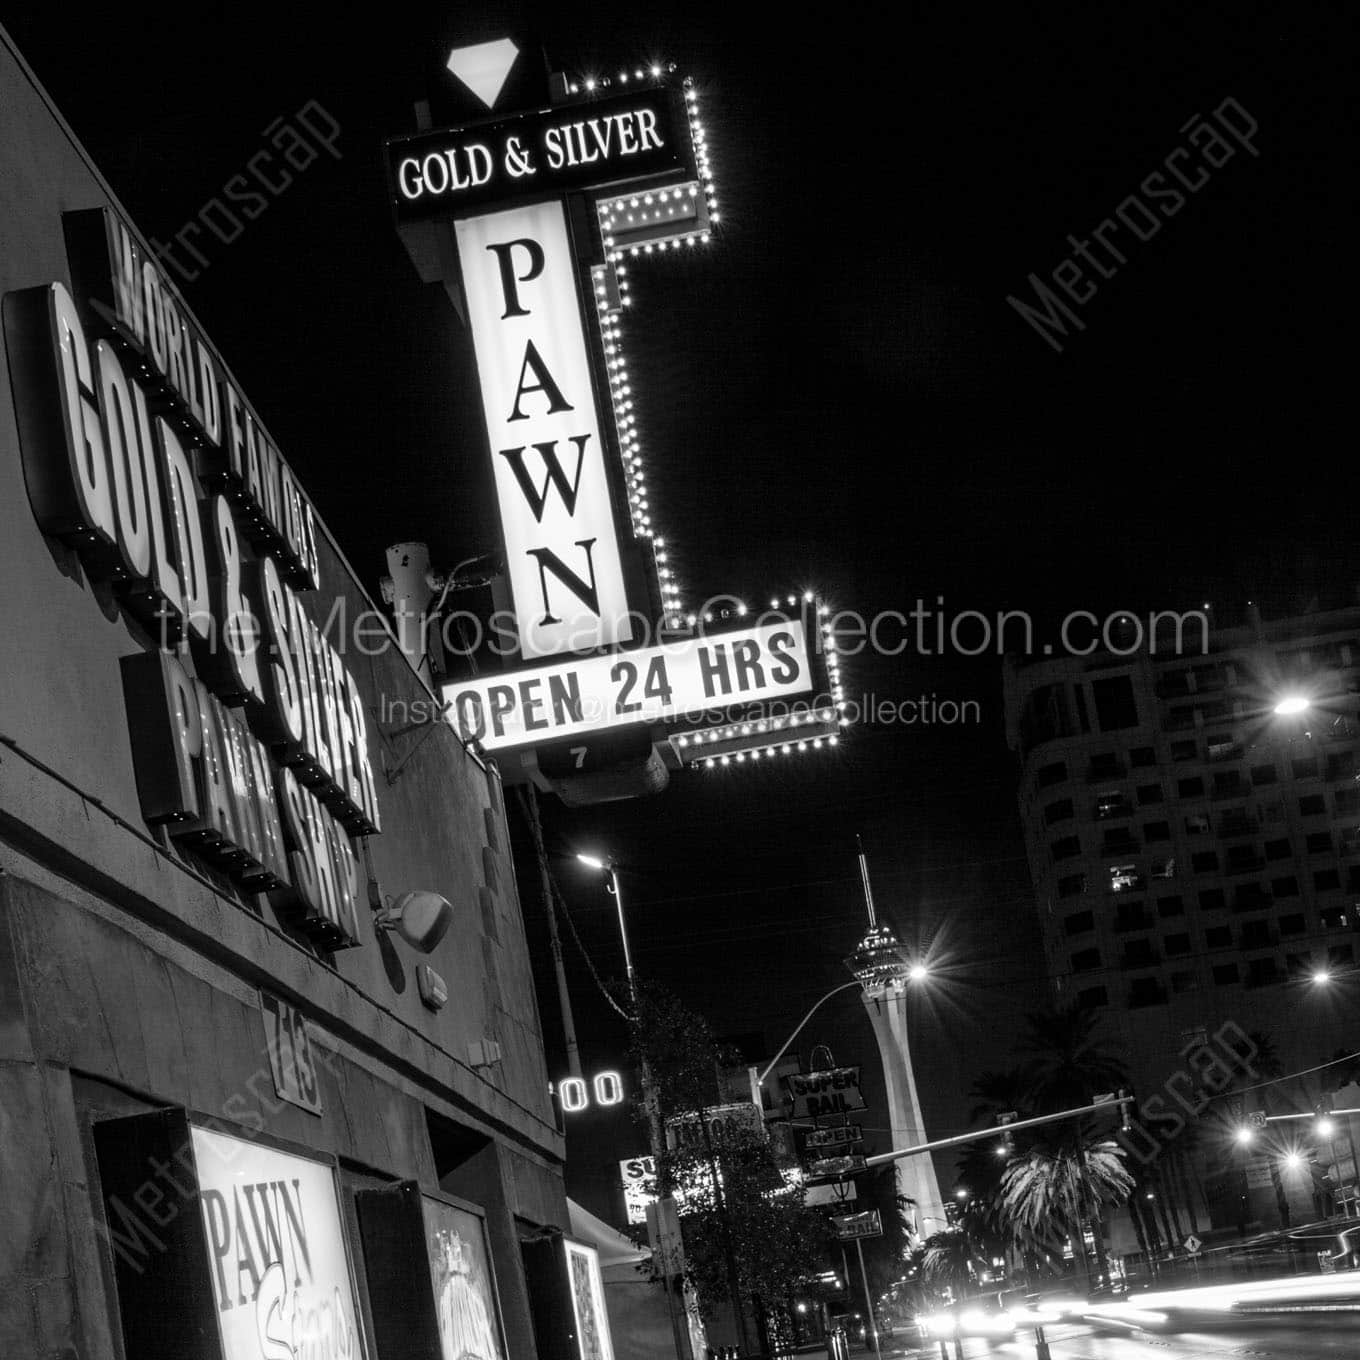 gold silver pawn shop at night Black & White Office Art